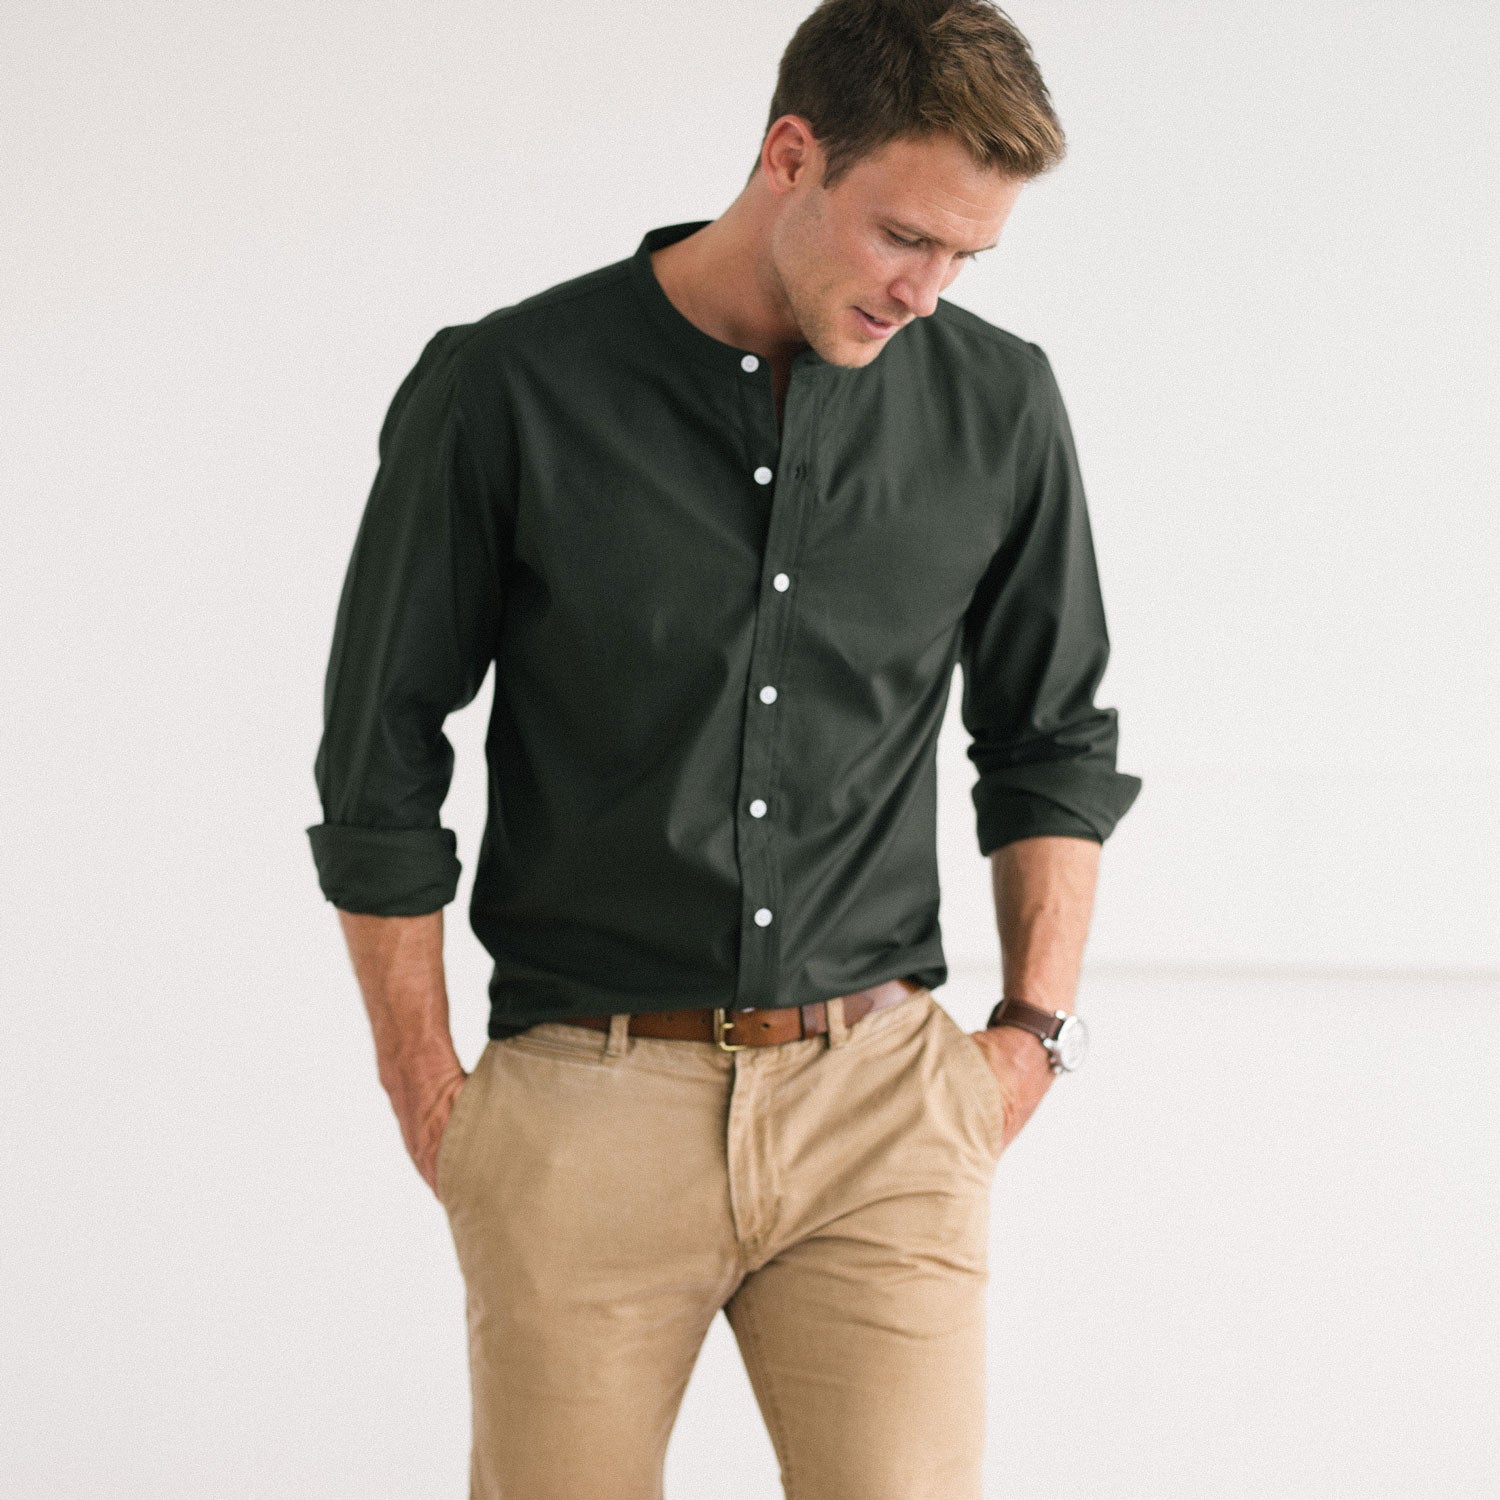 Men's band collar shirt in olive green with chinos image 